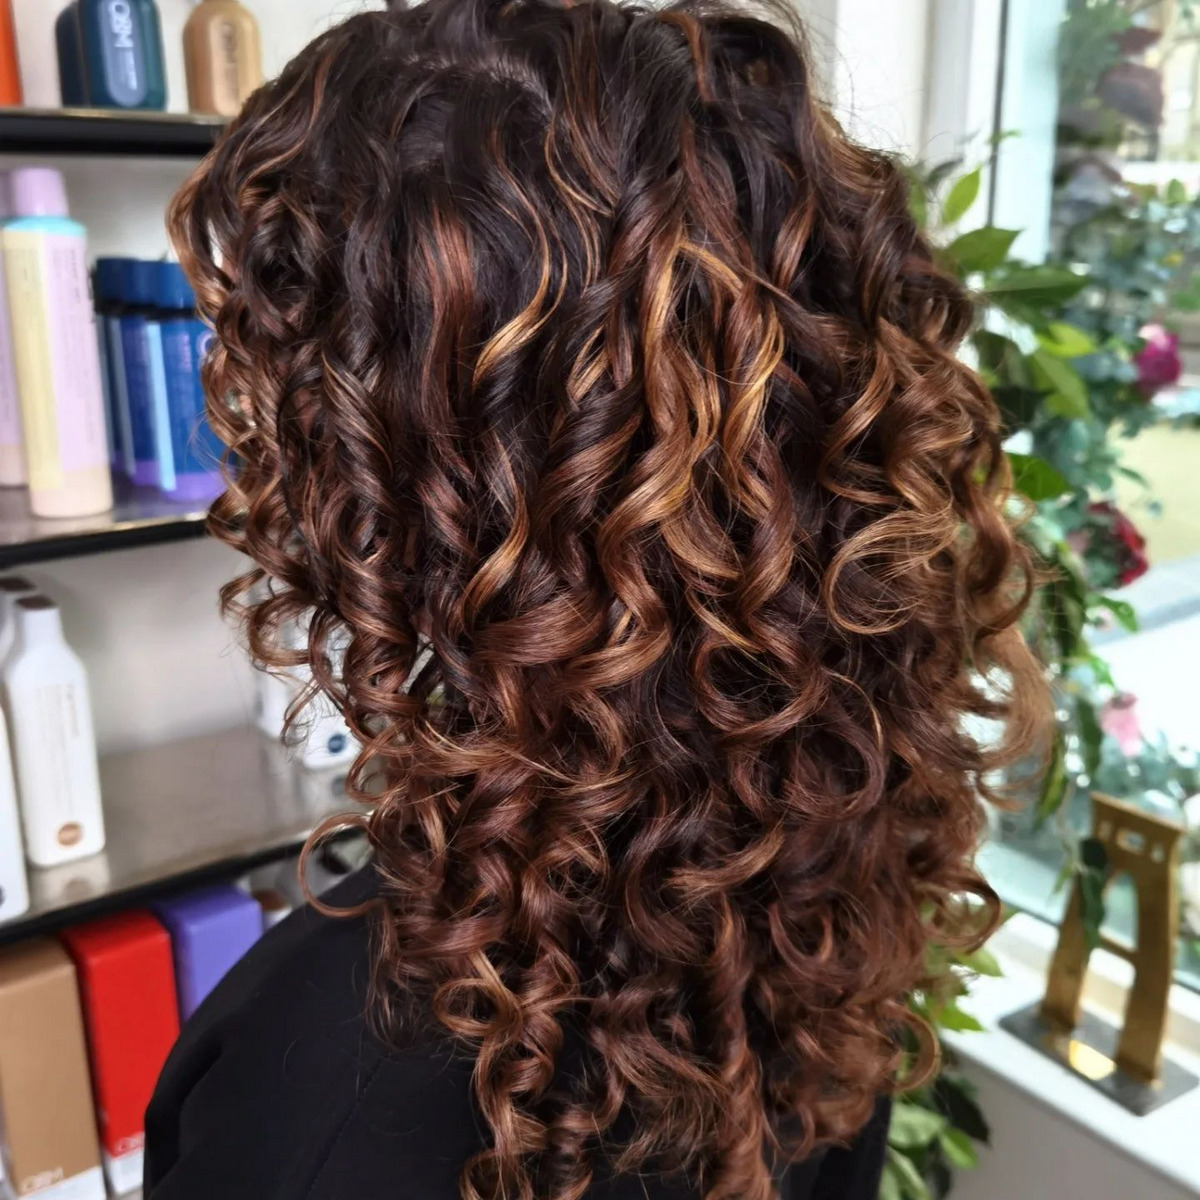 How to Do Balayage for Curly Hair | Wella Professionals